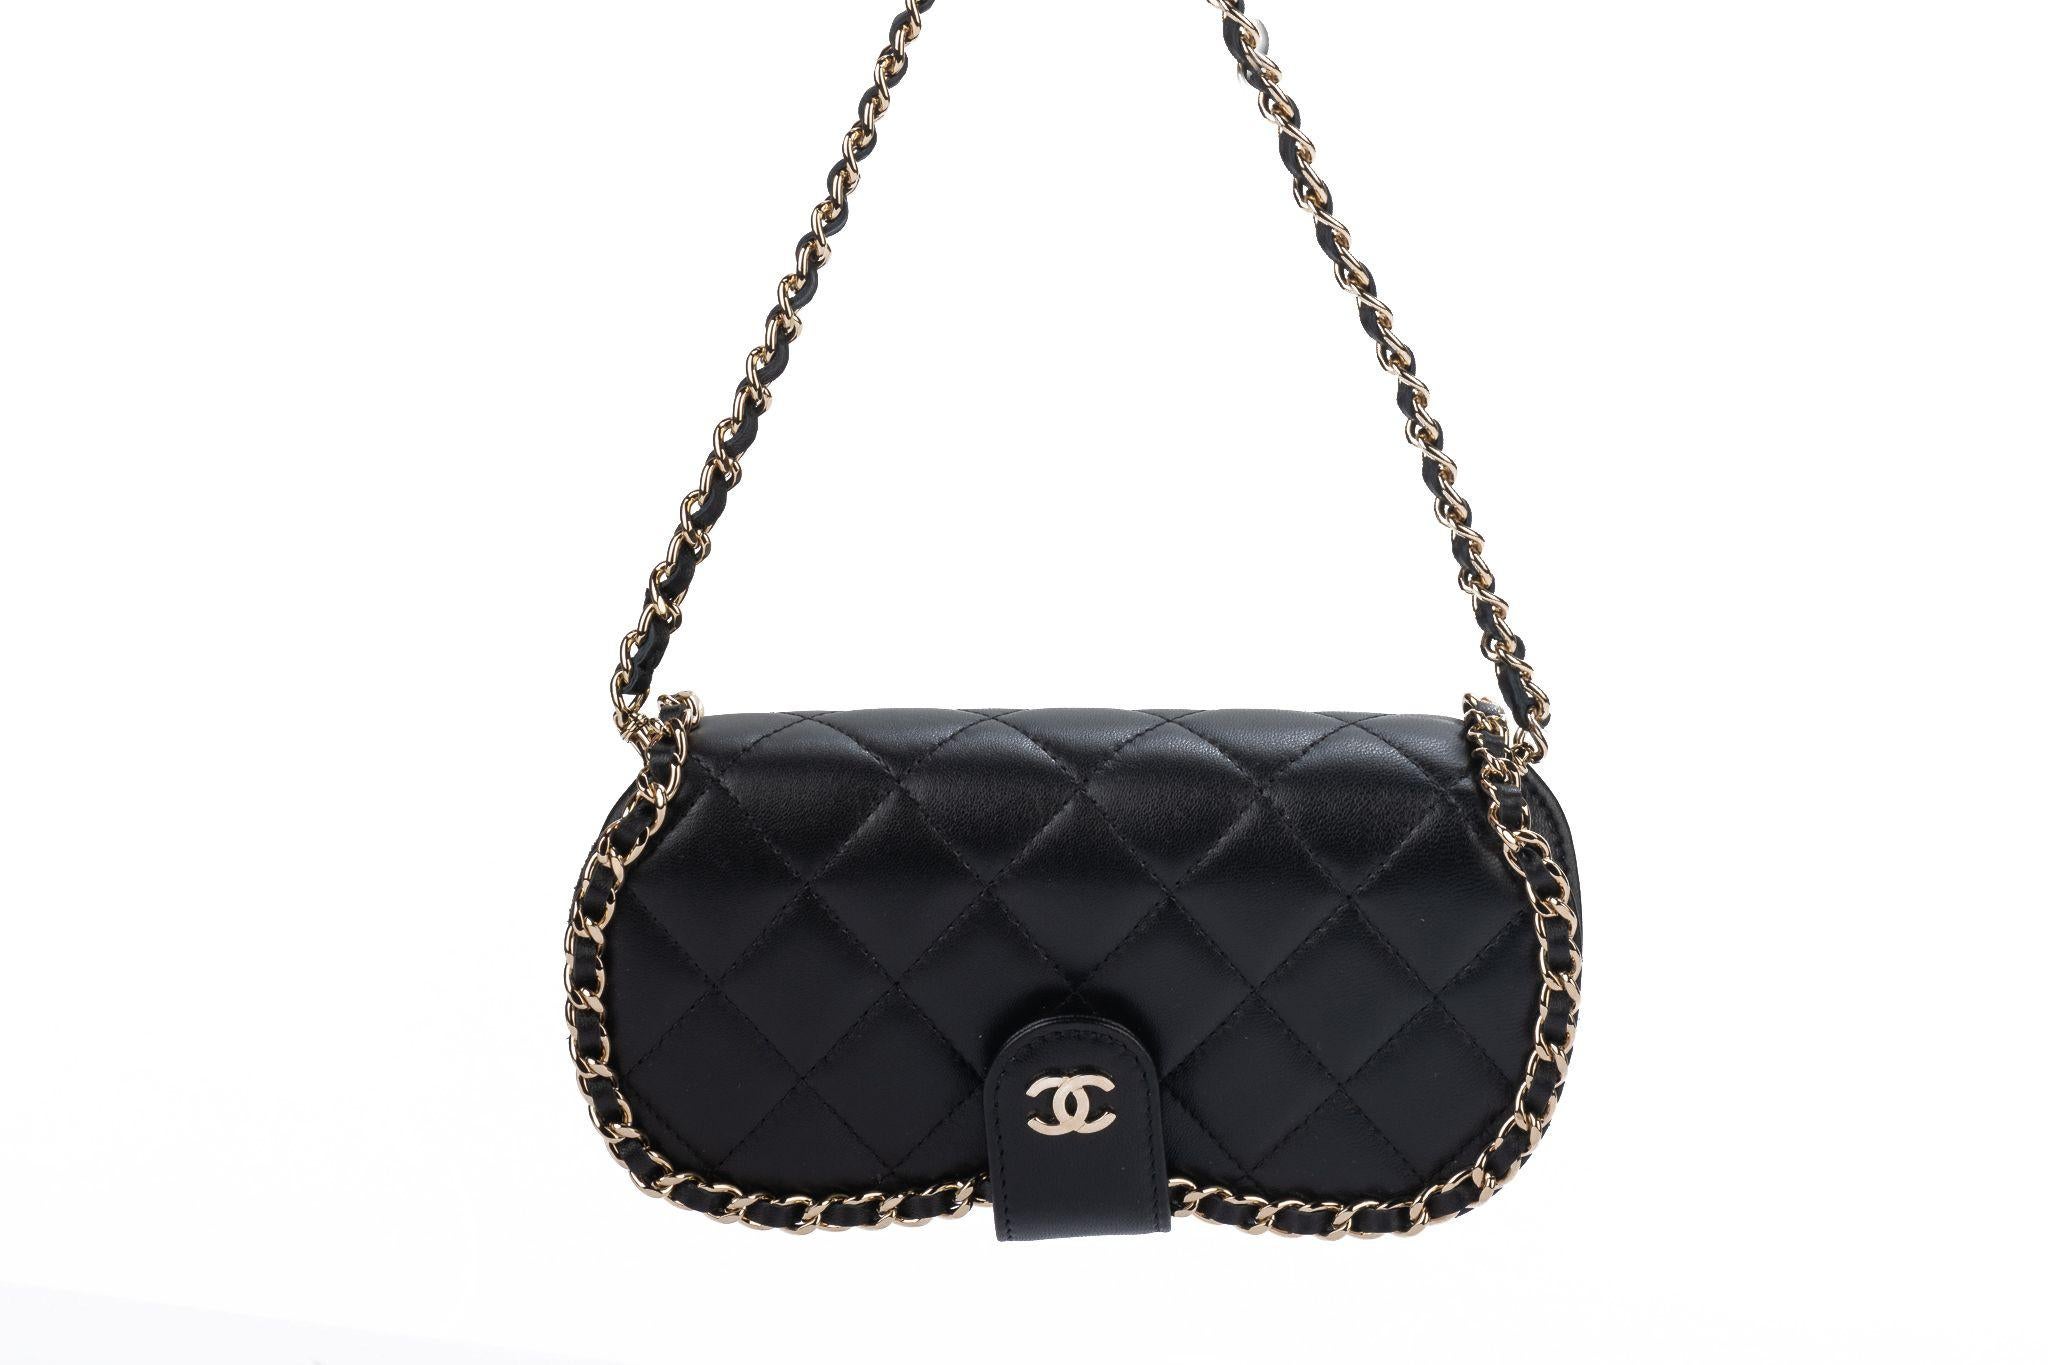 Chanel new rare and collectible black quilted sunglasses case. Can be worn cross body. Chain 22” detachable. Collection 32. Comes with hologram, booklet, dust bag and original box.